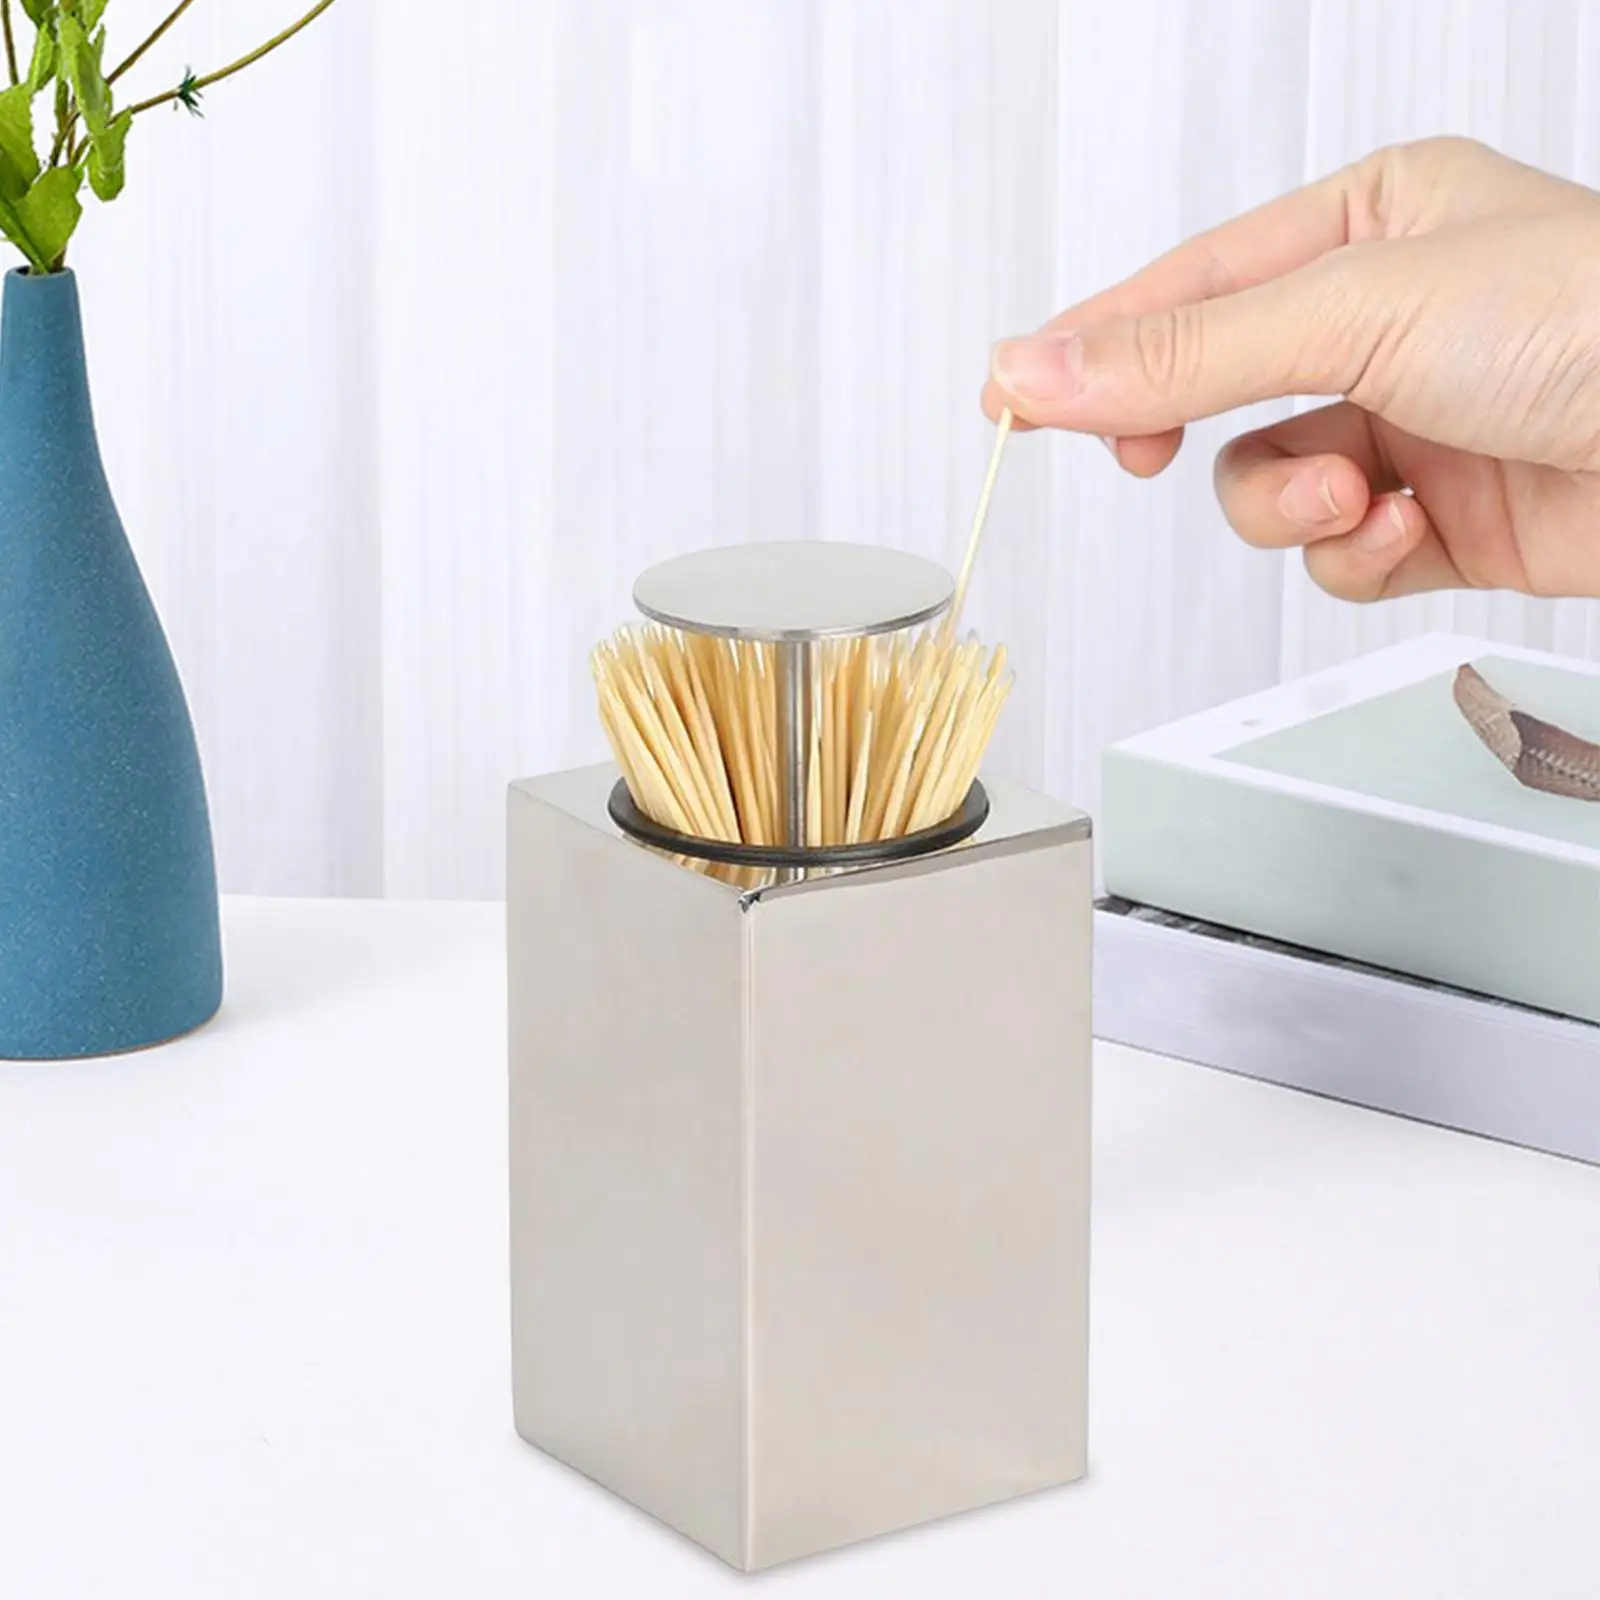 Automatic Toothpick Dispenser Retractable Push Button Top for houses fun Gifts